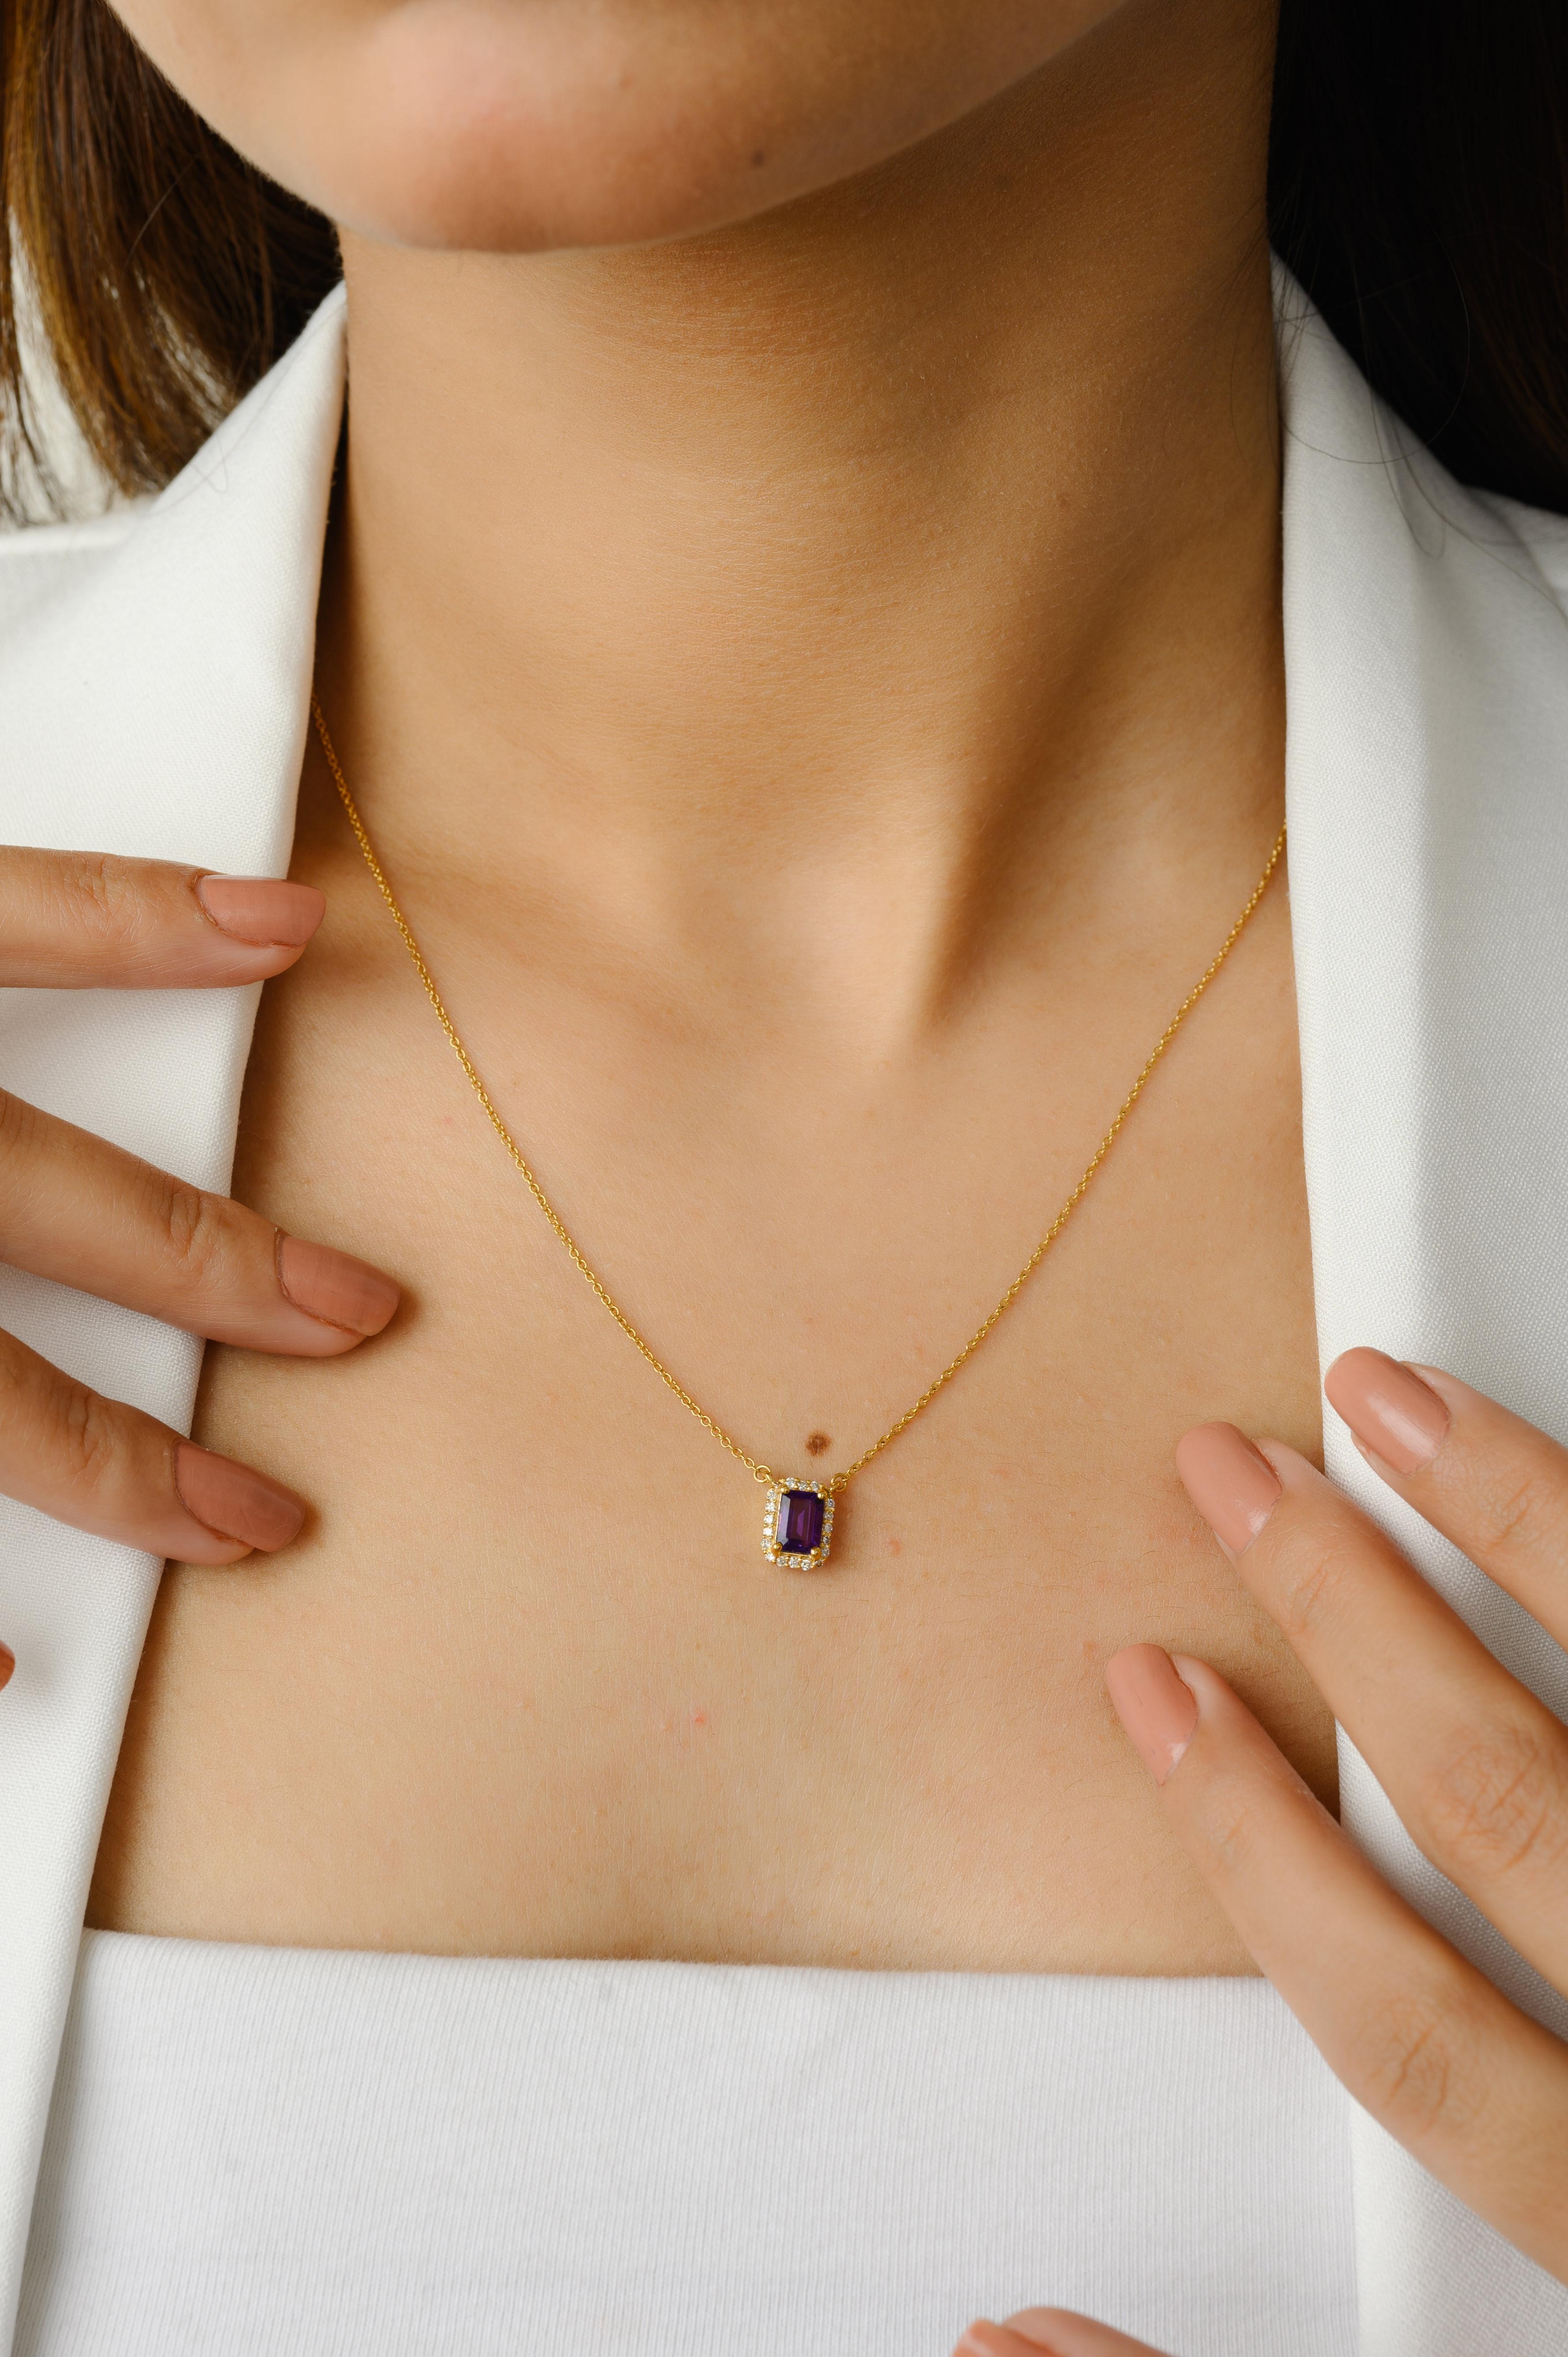 Amethyst Halo Diamond Everyday Pendant Necklace in 14K Gold studded with octagon cut amethyst and halo diamonds. This stunning piece of jewelry instantly elevates a casual look or dressy outfit. 
Amethyst helps to relieve stress and anxiety in your